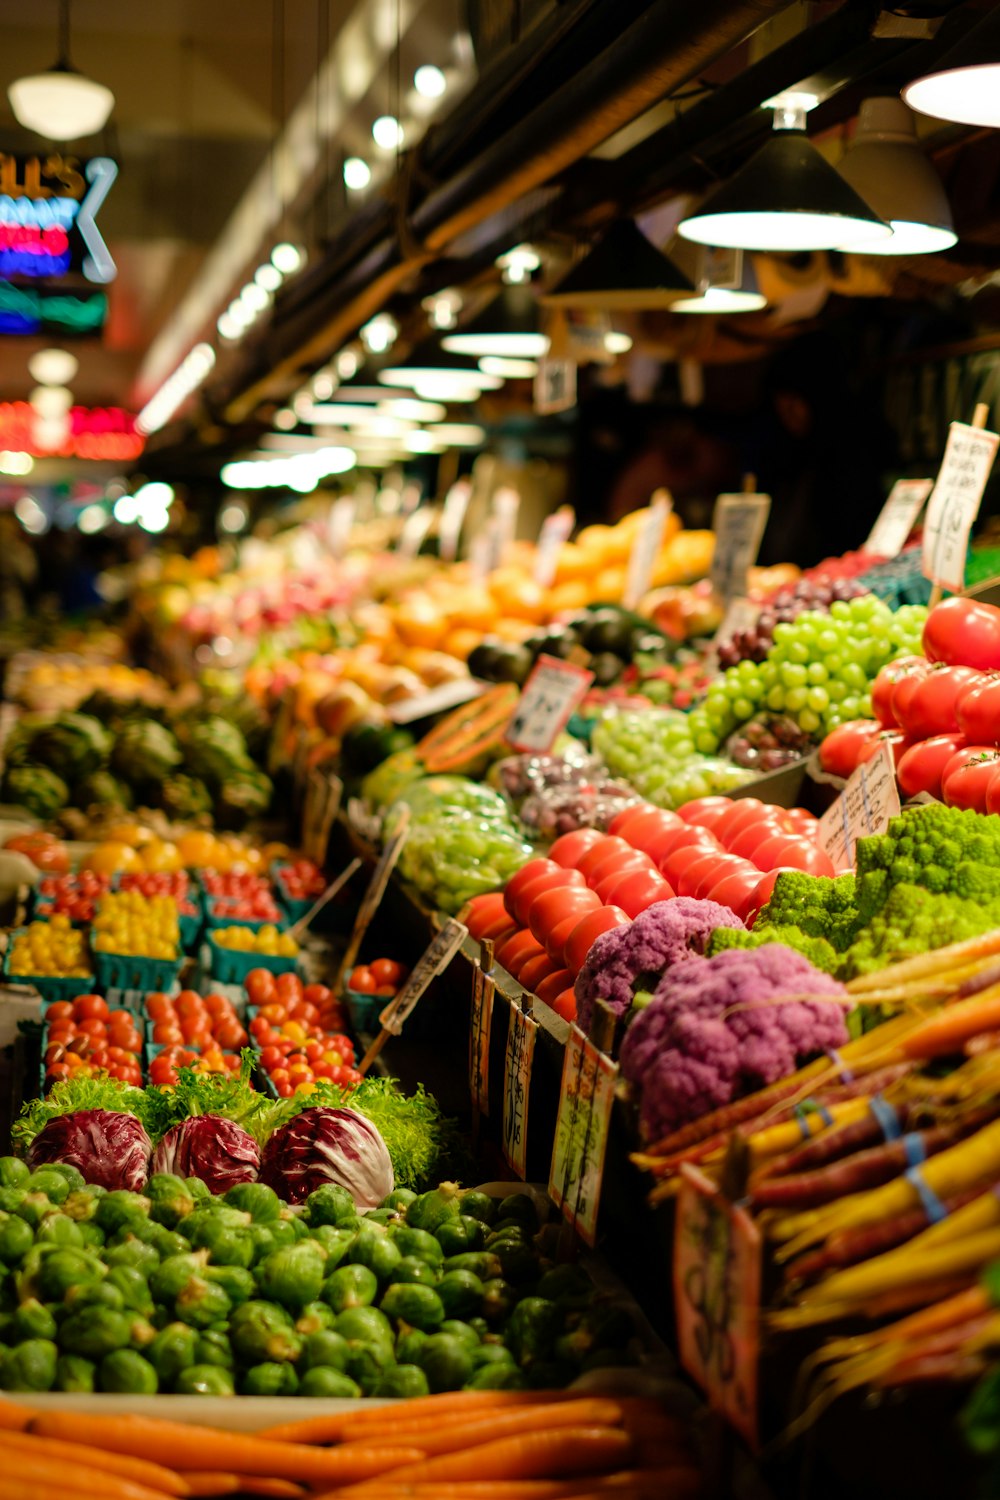 100+ Grocery Pictures [HD] | Download Free Images on Unsplash